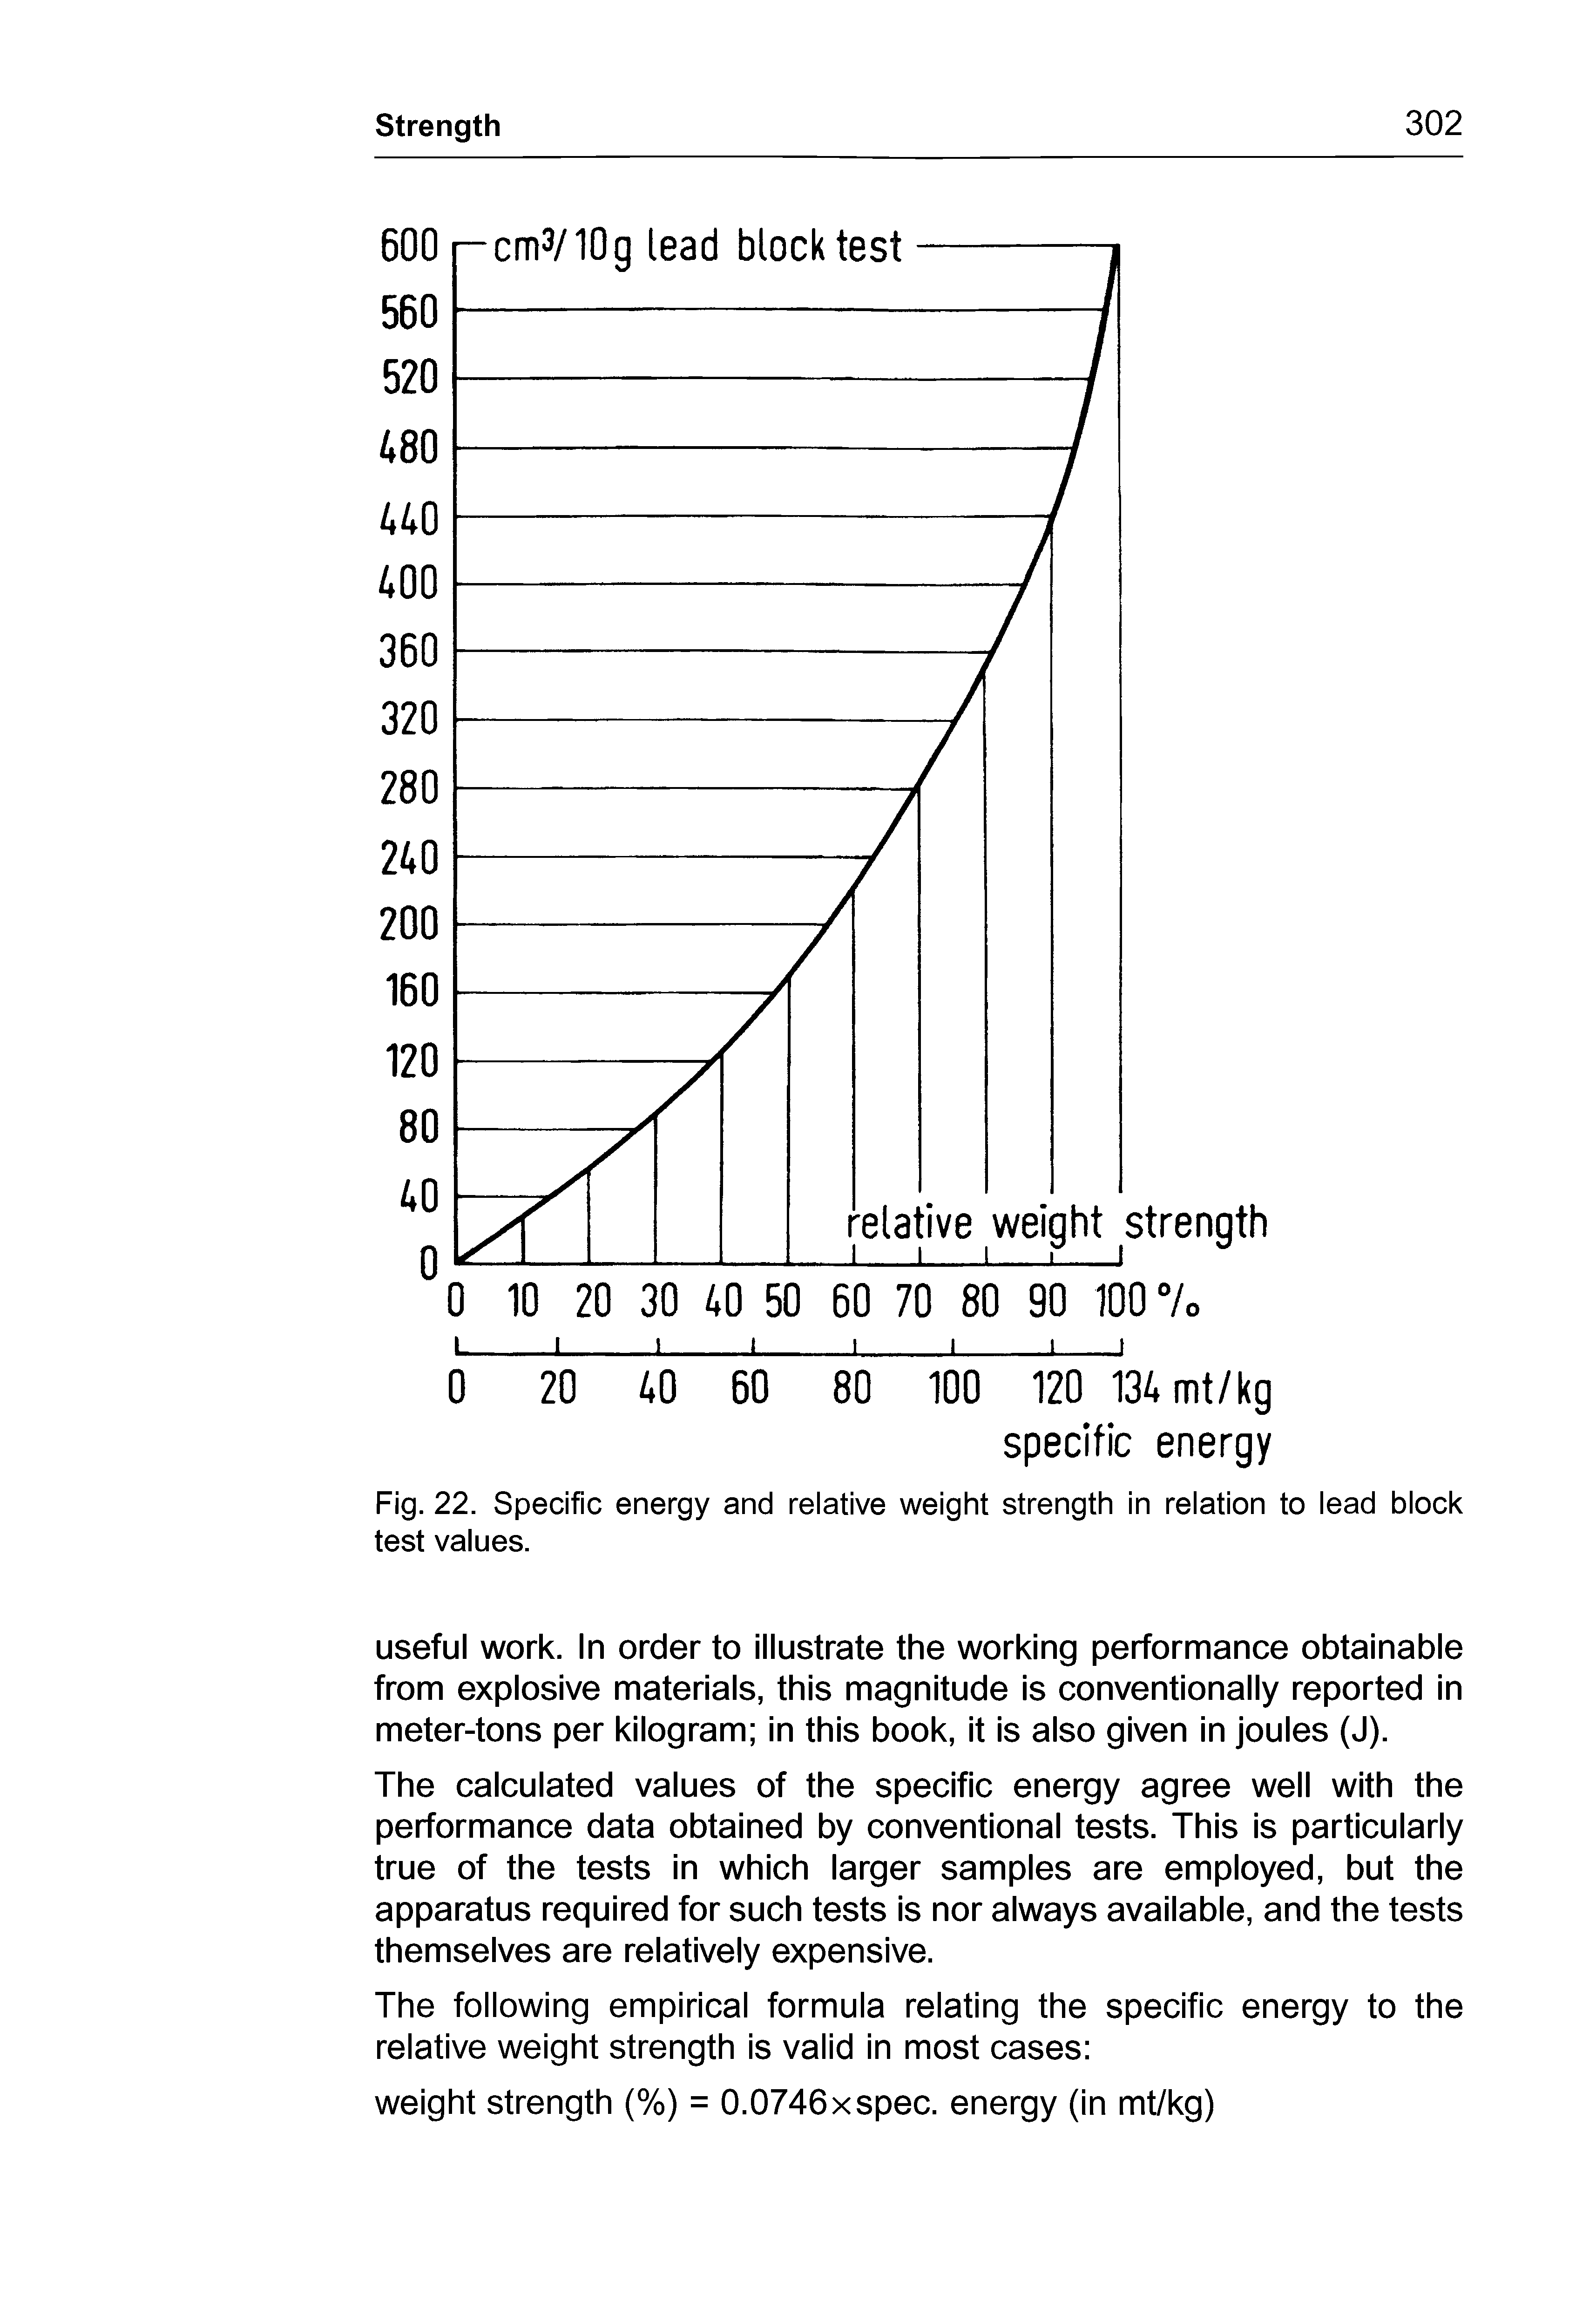 Fig. 22. Specific energy and relative weight strength in relation to lead block test values.